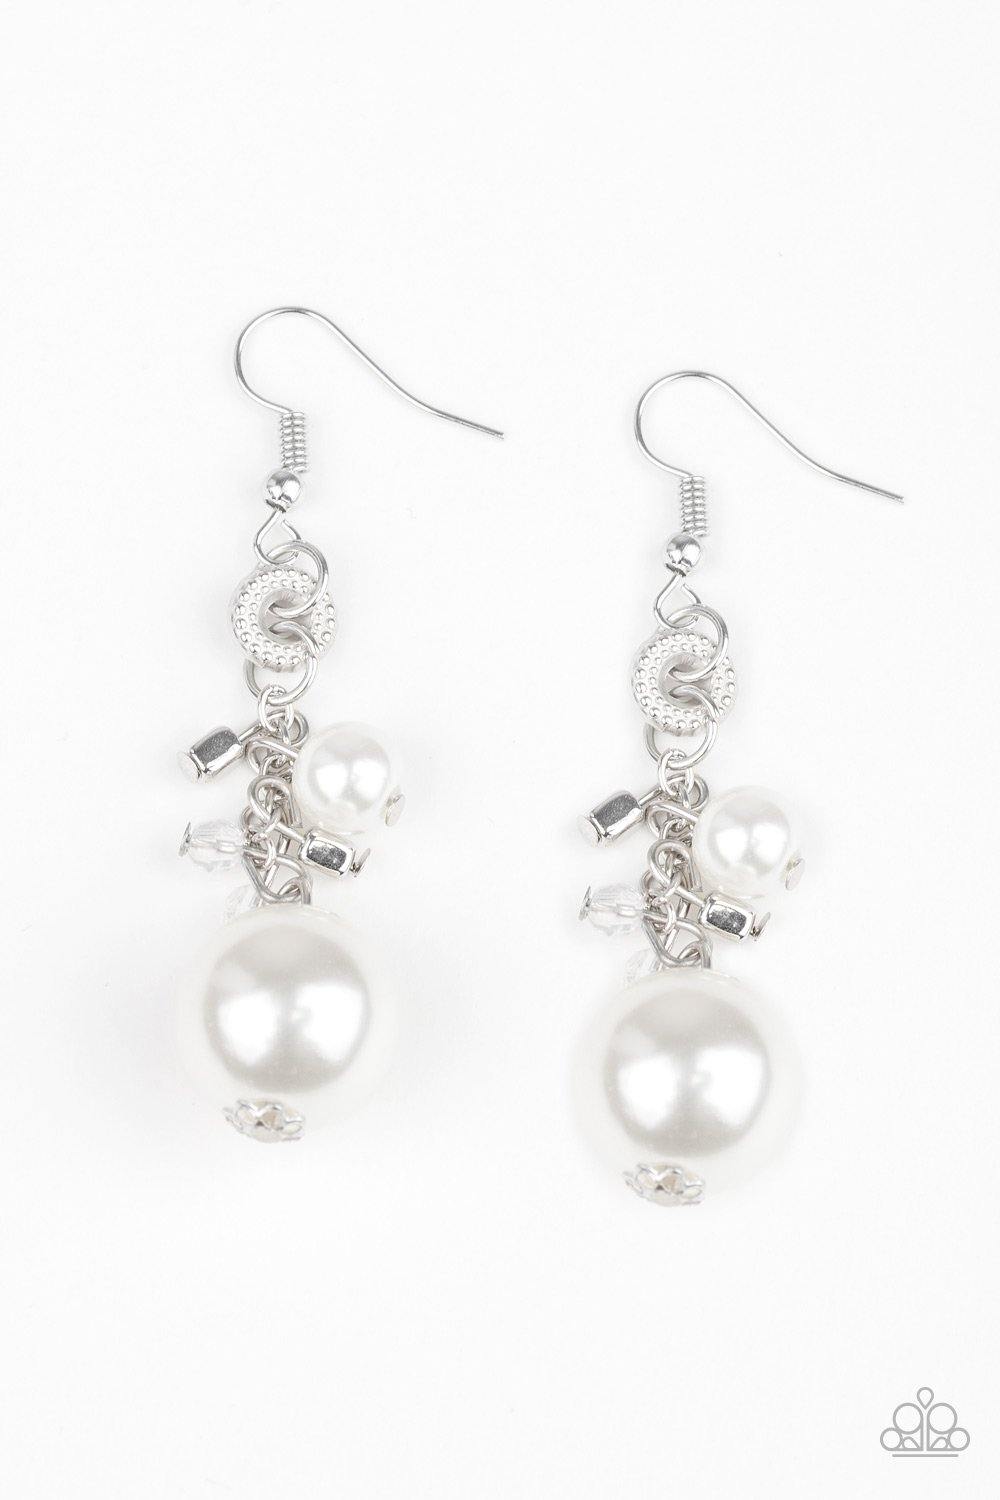 PAPARAZZI GLAMOUR GRADUATE - SILVER PEARLS HOOPS EARRINGS – Bee's Bling Bash